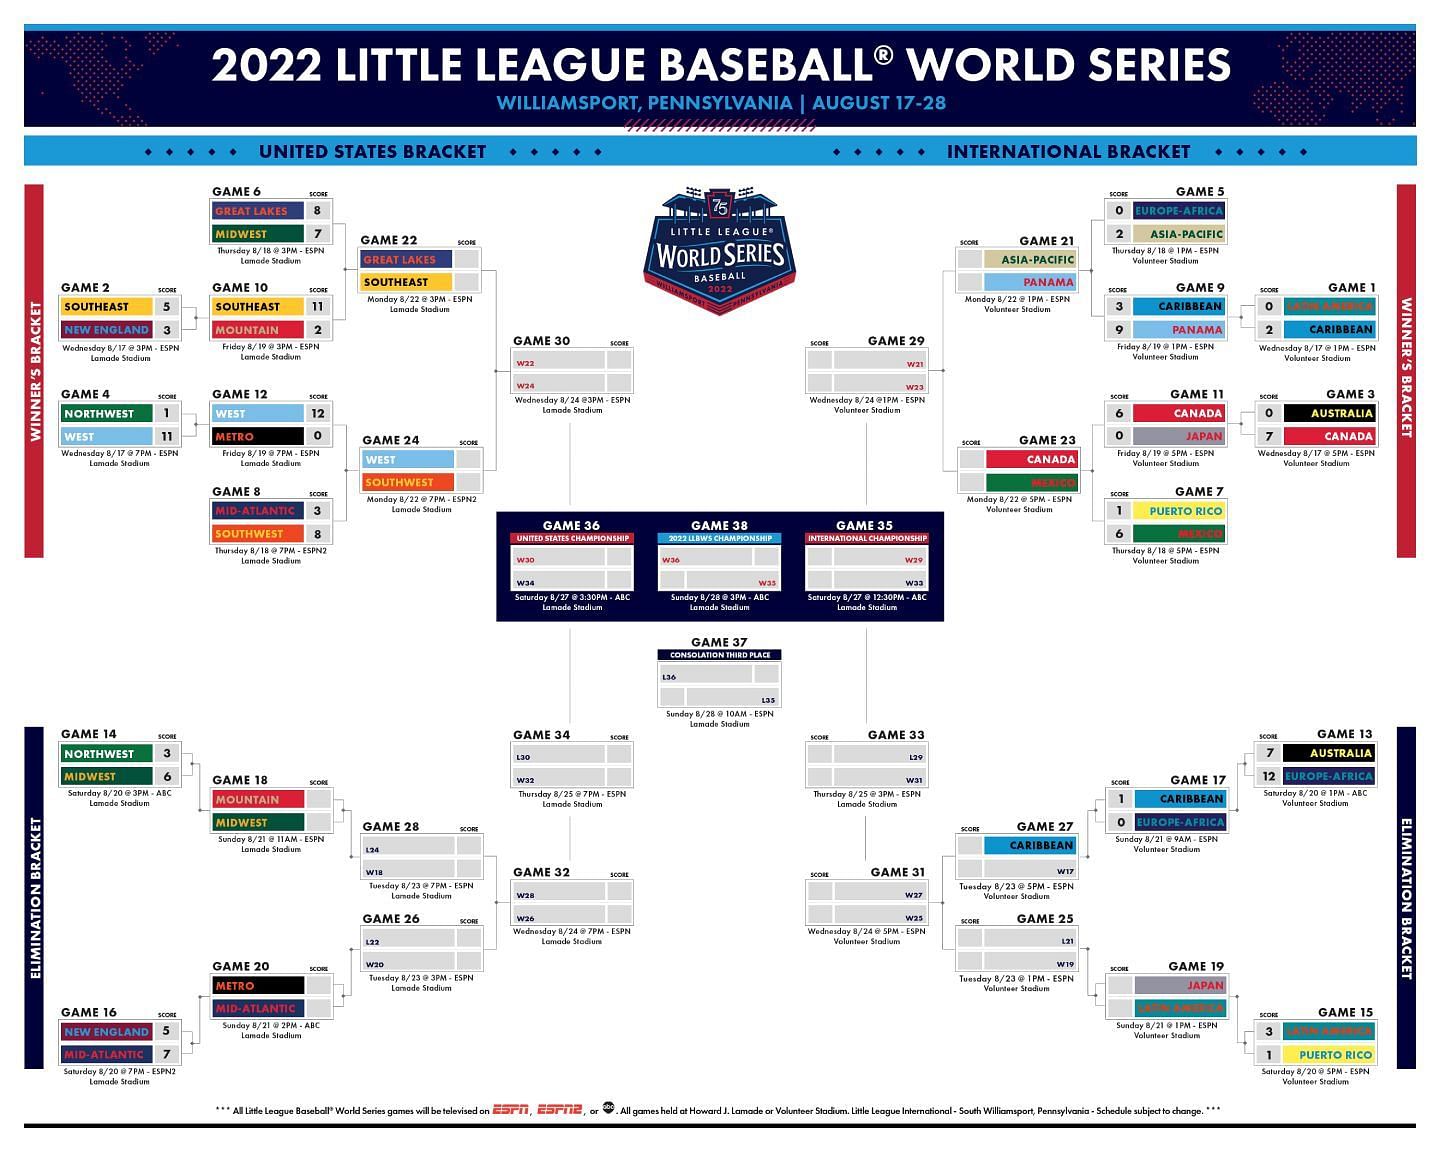 The remaining bracket for the 2022 LLWS